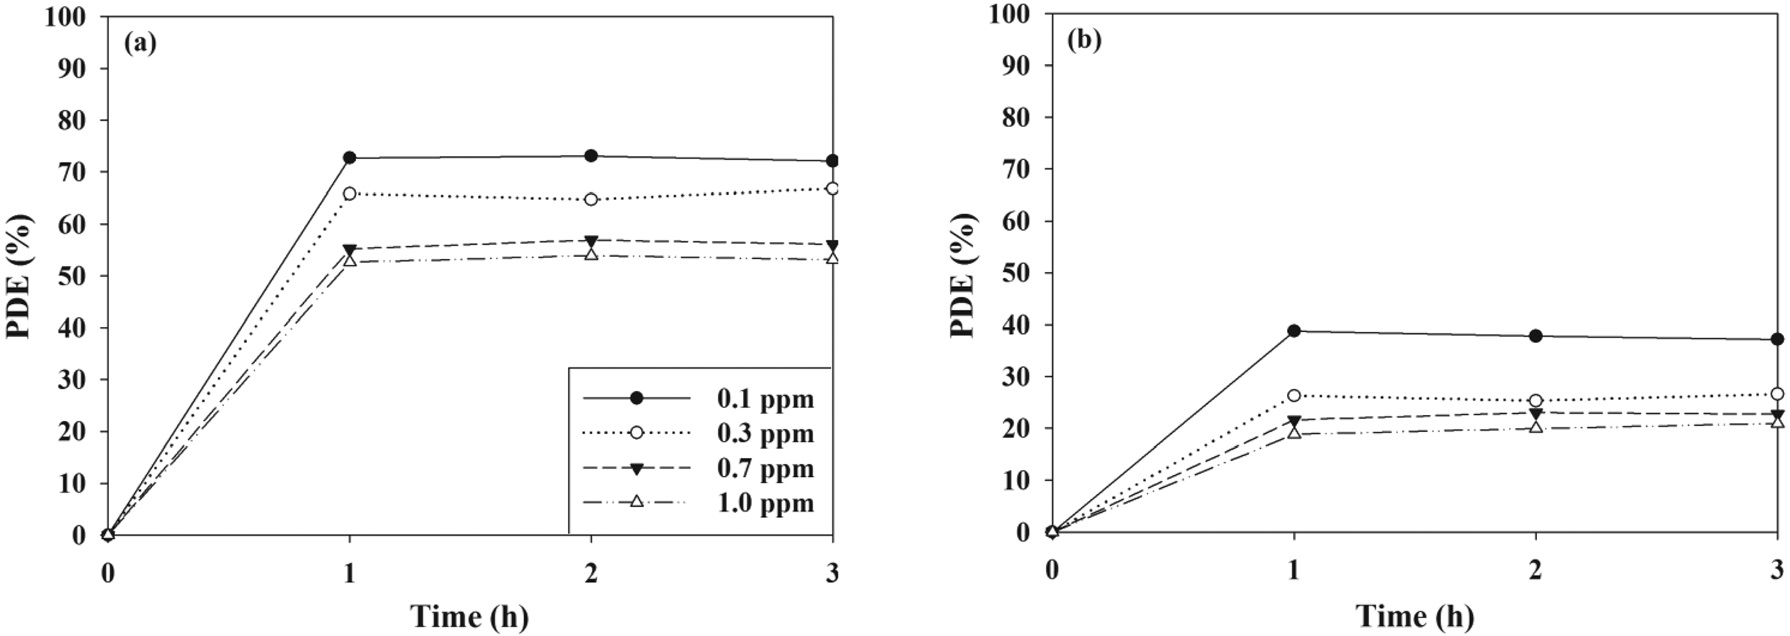 Photocatalytic degradation efficiency (PDE) of (a) TCE and (b) TTCE determined using a PANI-TiO2 composite calcined at 450 ℃ according to inlet concentration (0.1 , 0.3, 0.7, and 1.0 ppm).